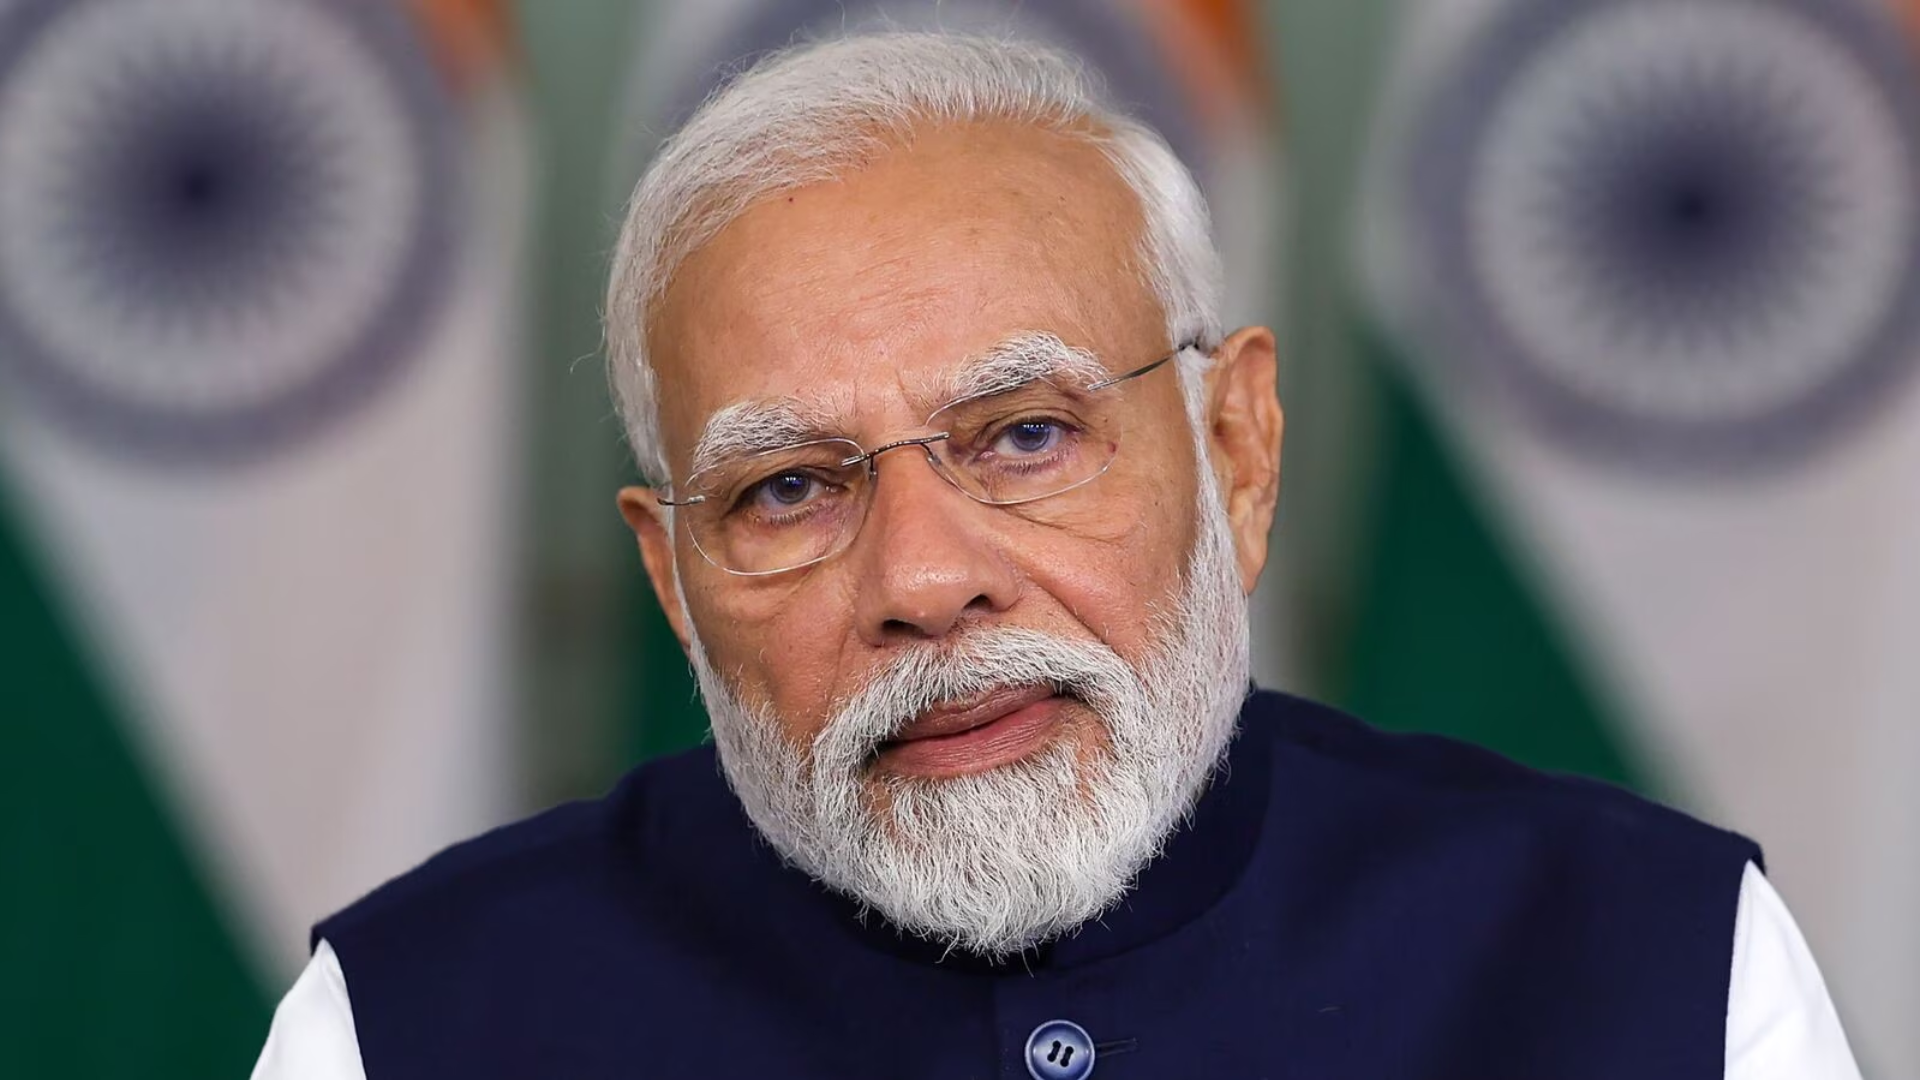 Case against Modi: Delhi HC to hear plea seeking disqualification of PM Modi from elections for six years